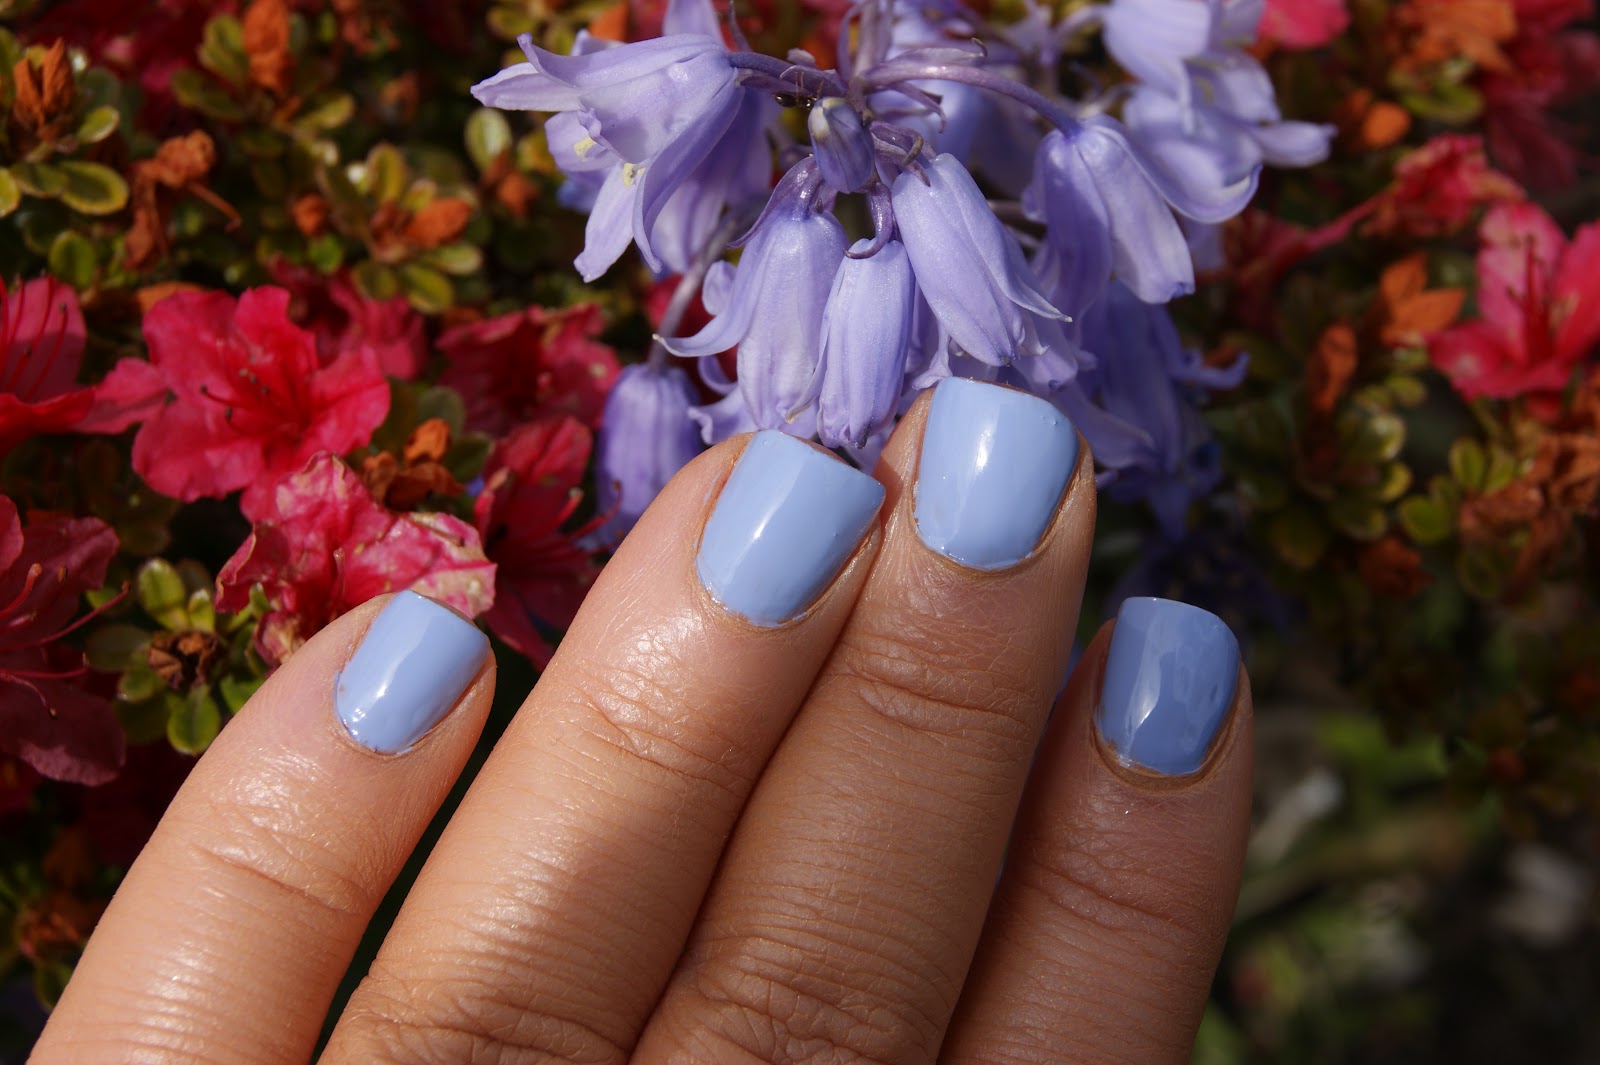 Nails Inc Bluebell - Review